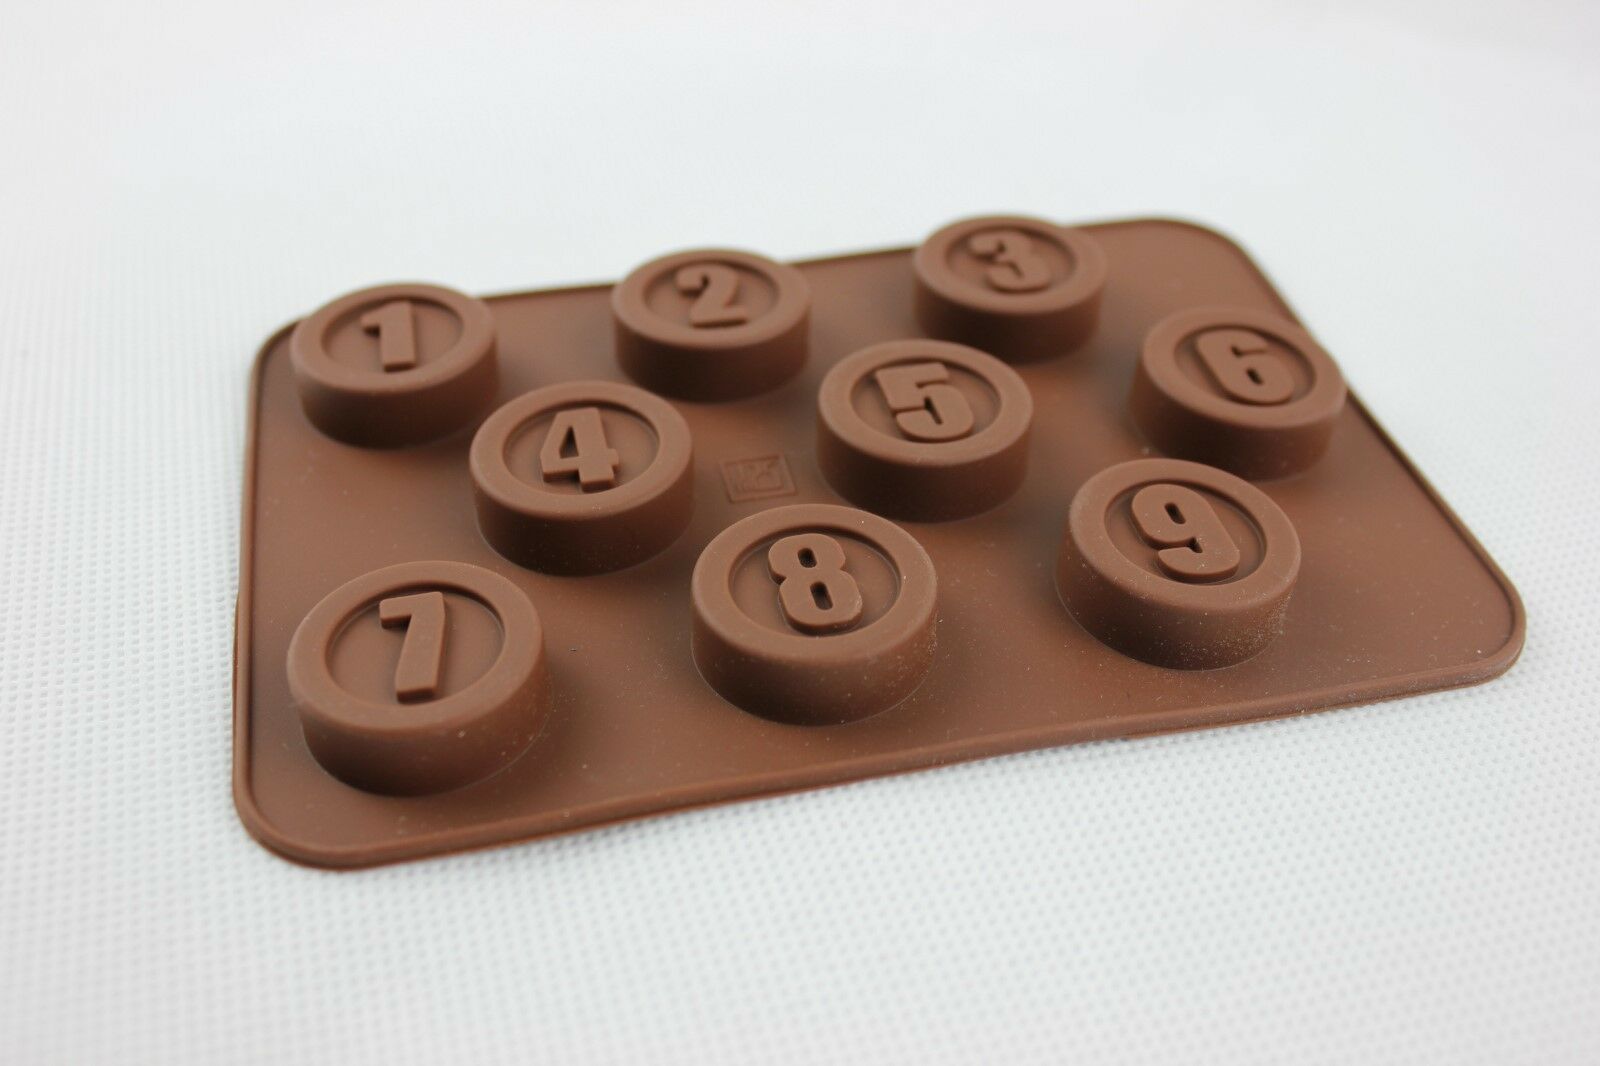 attachment-https://www.cupcakeaddicts.co.uk/wp-content/uploads/imported/9/Round-Numbers-Silicone-Chocolate-Mould-9-Cell-Jelly-Ice-Cube-Soap-Candle-Tray-323363300939-2.jpg